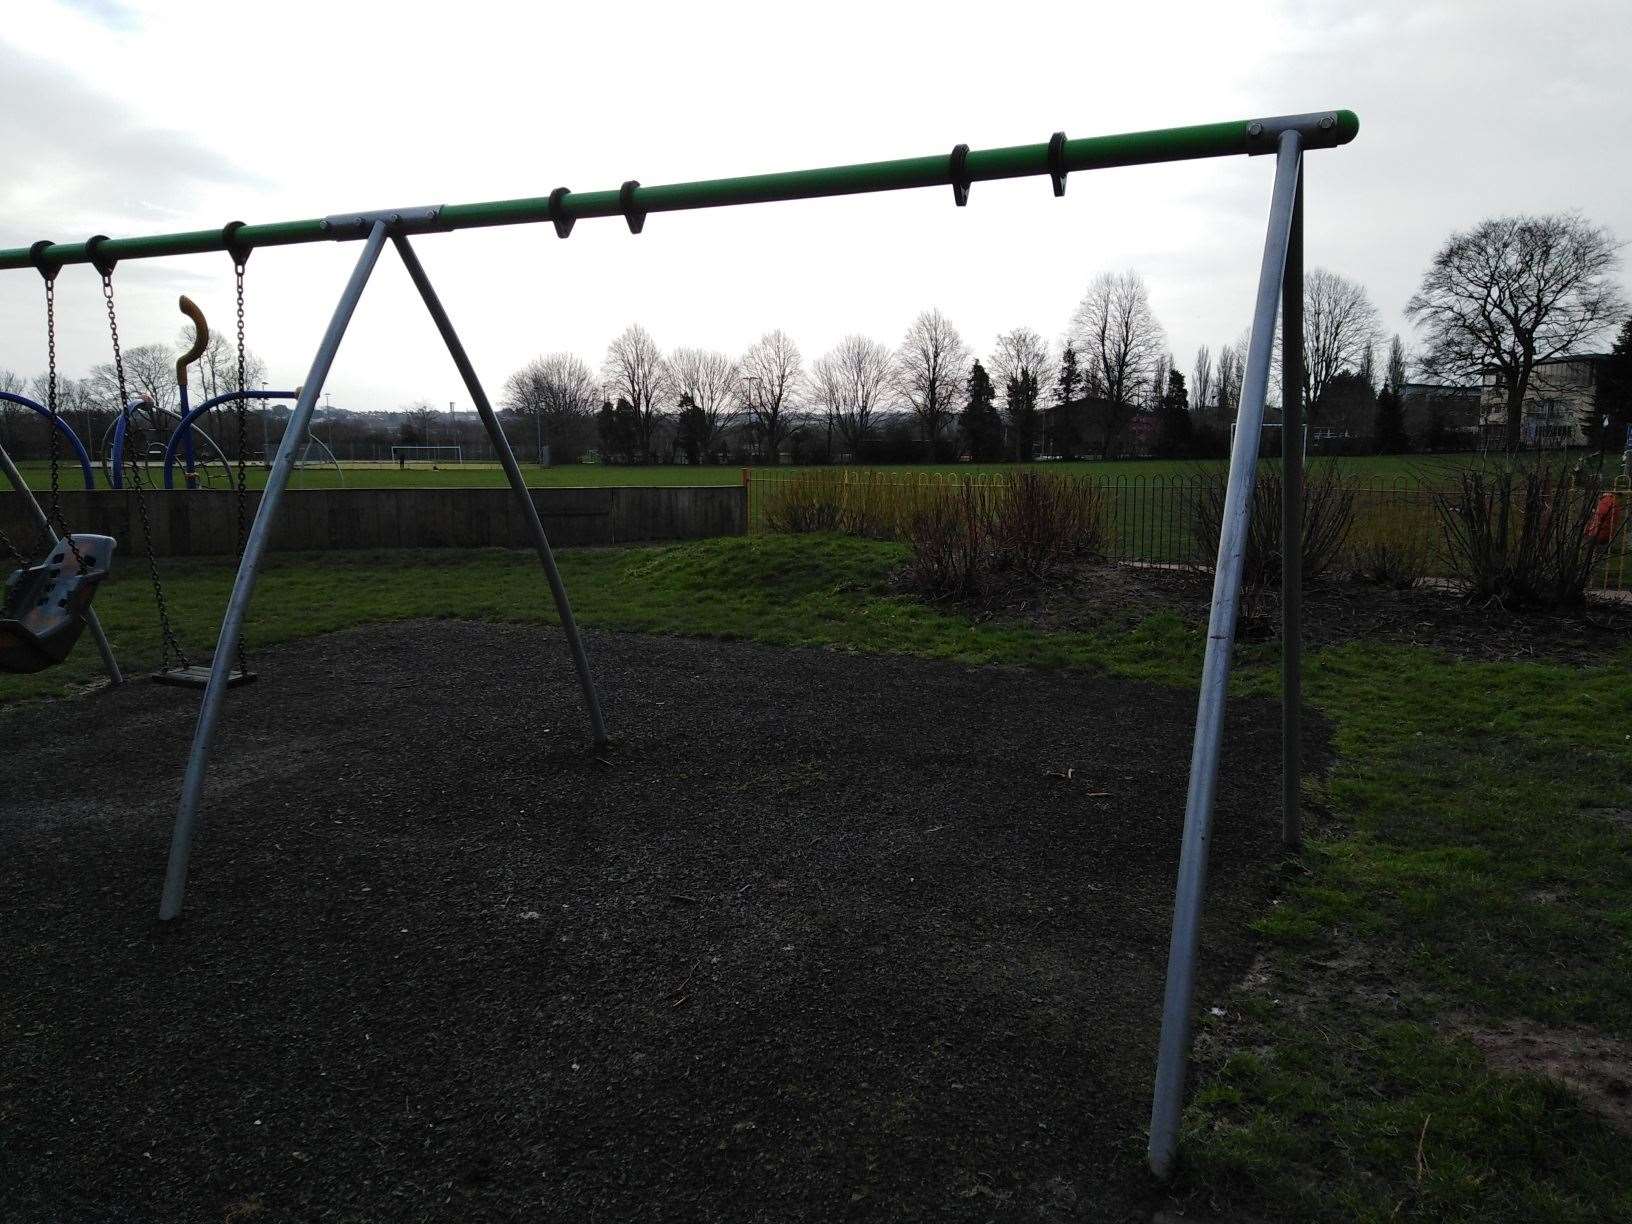 The swings have disappeared from the Victoria recreation ground